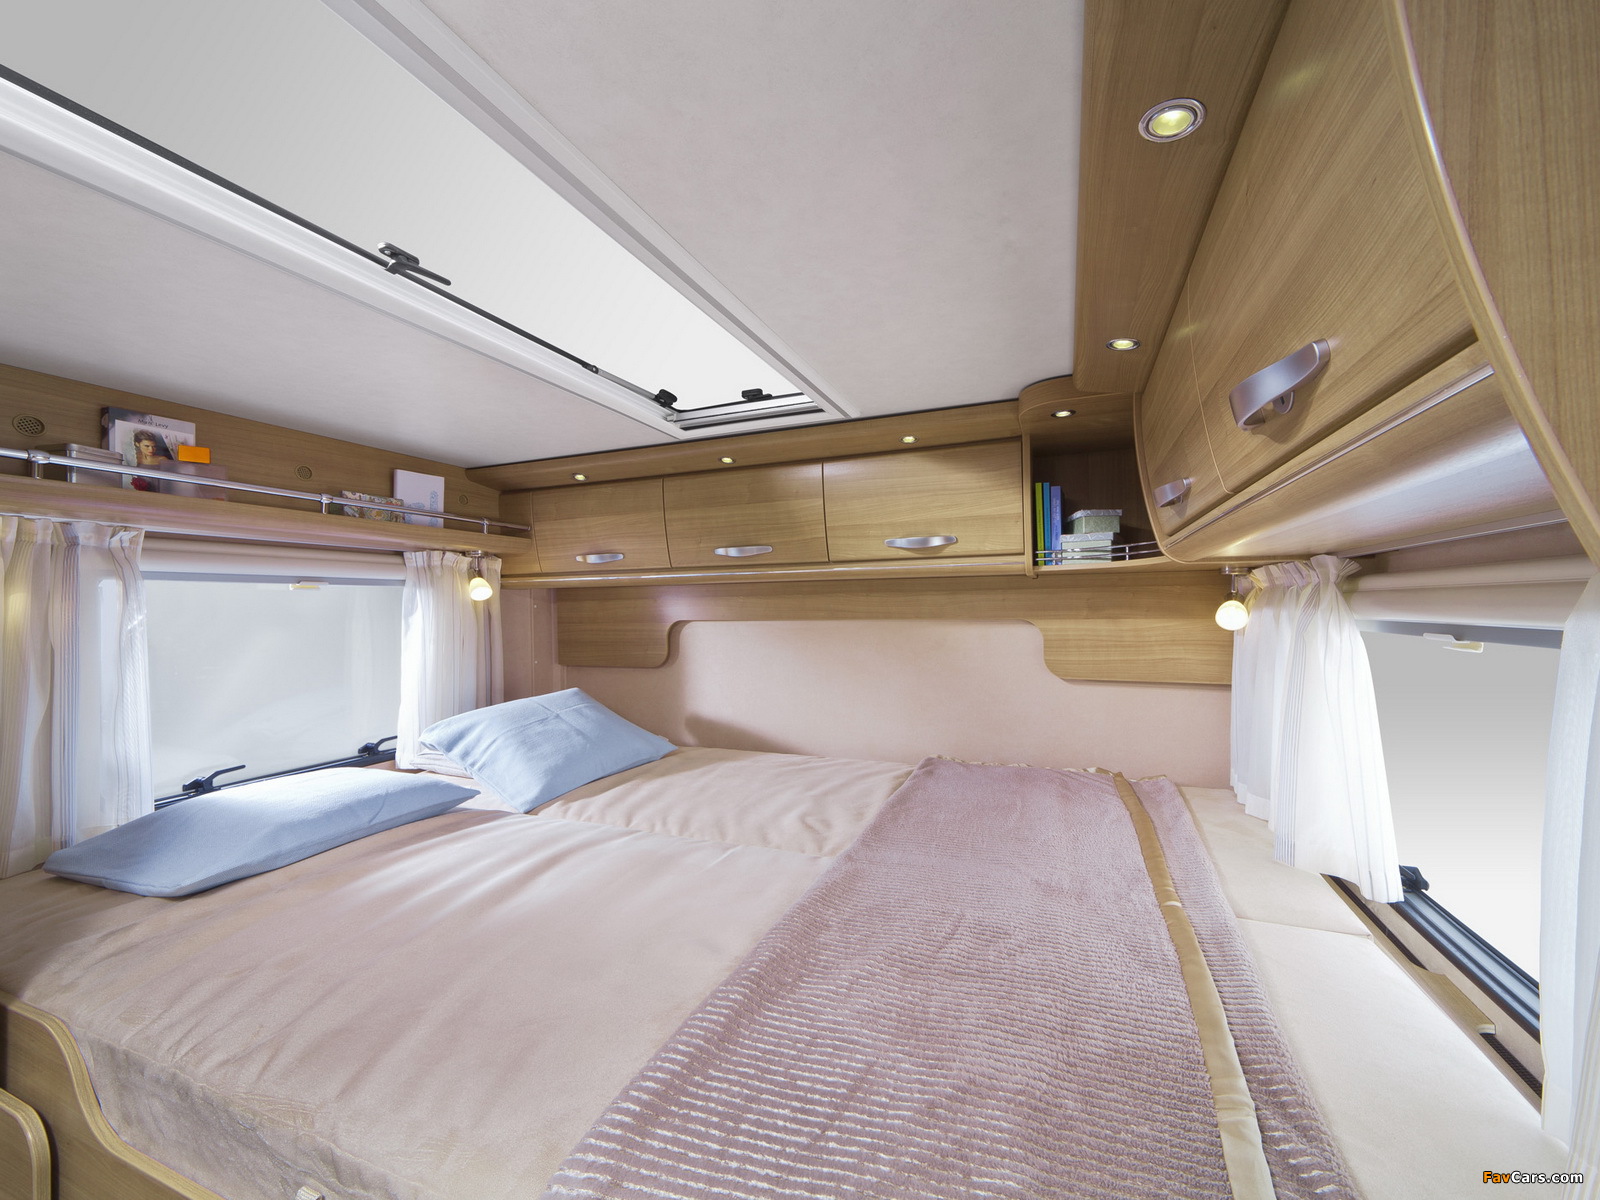 Pictures of Hymer Tramp Premium 50 2012 (1600 x 1200)